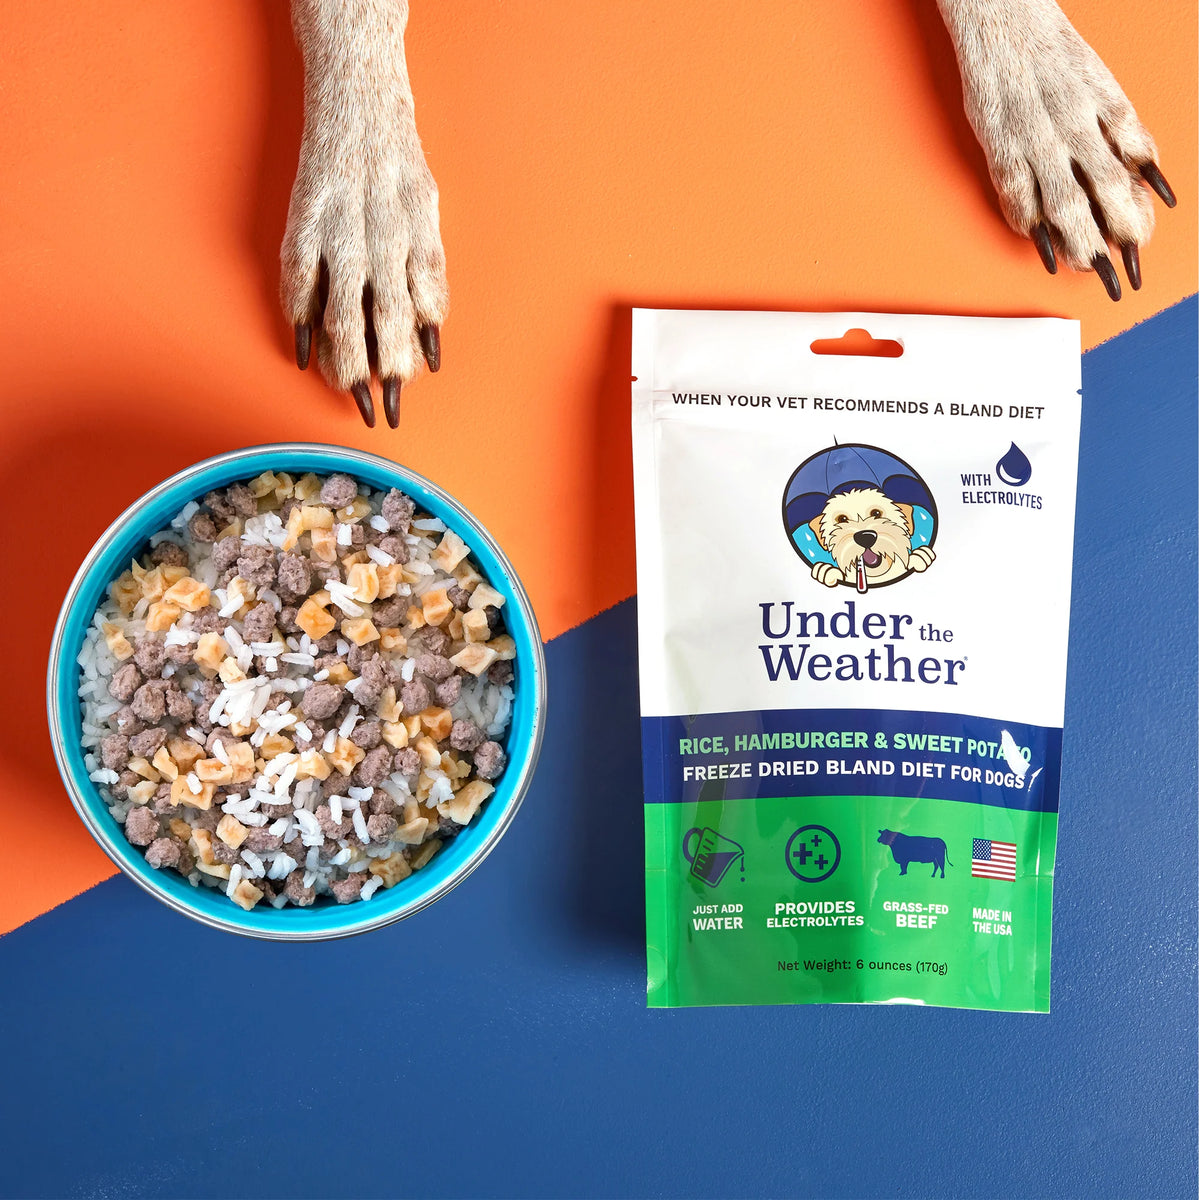 Under the Weather for Dogs - Rice, Hamburger & Sweet Potato meal mix 6 oz